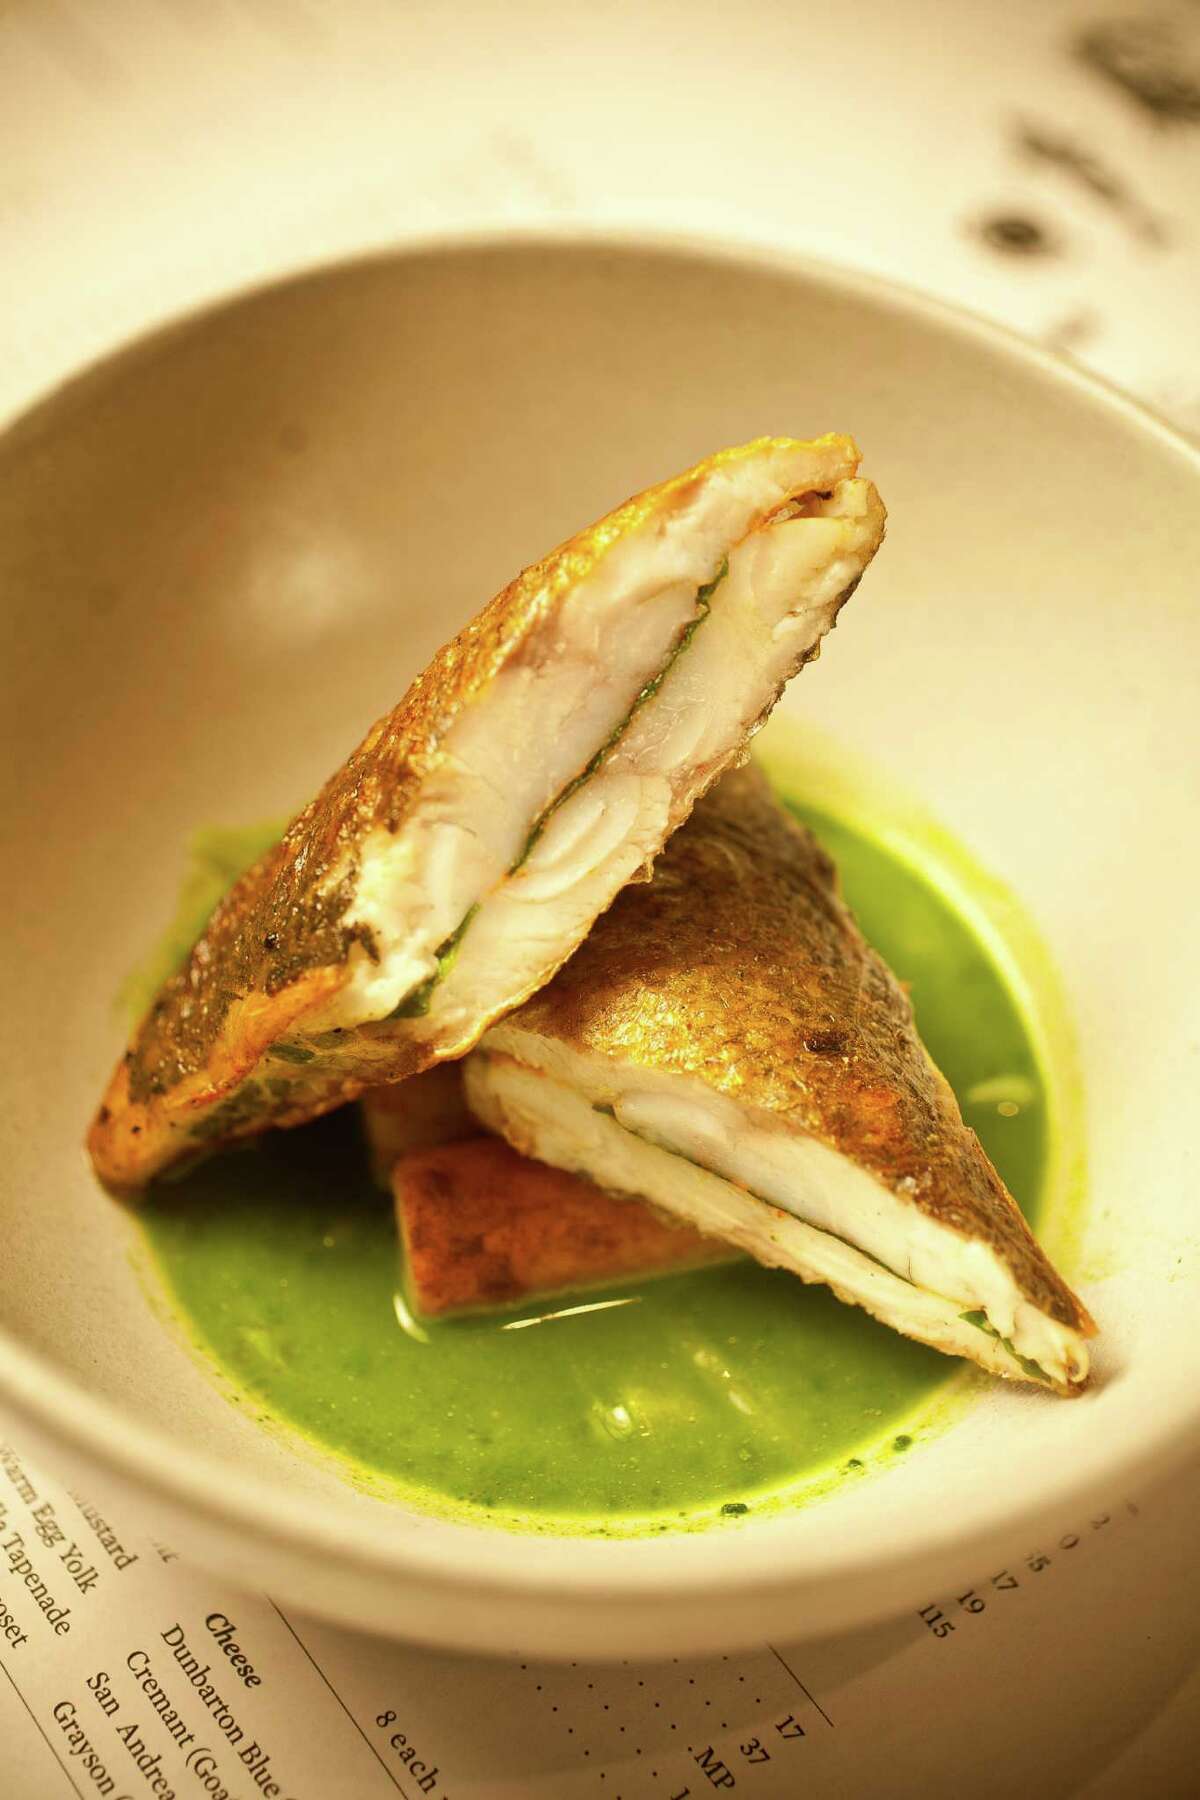 The Pass & Provisions' branzino fillets sandwiching lovage on a mussel/parsley/ginger soup with marrow browned potatoes, Tuesday, Sept. 11, 2012, in Houston. ( Nick de la Torre / Houston Chronicle )